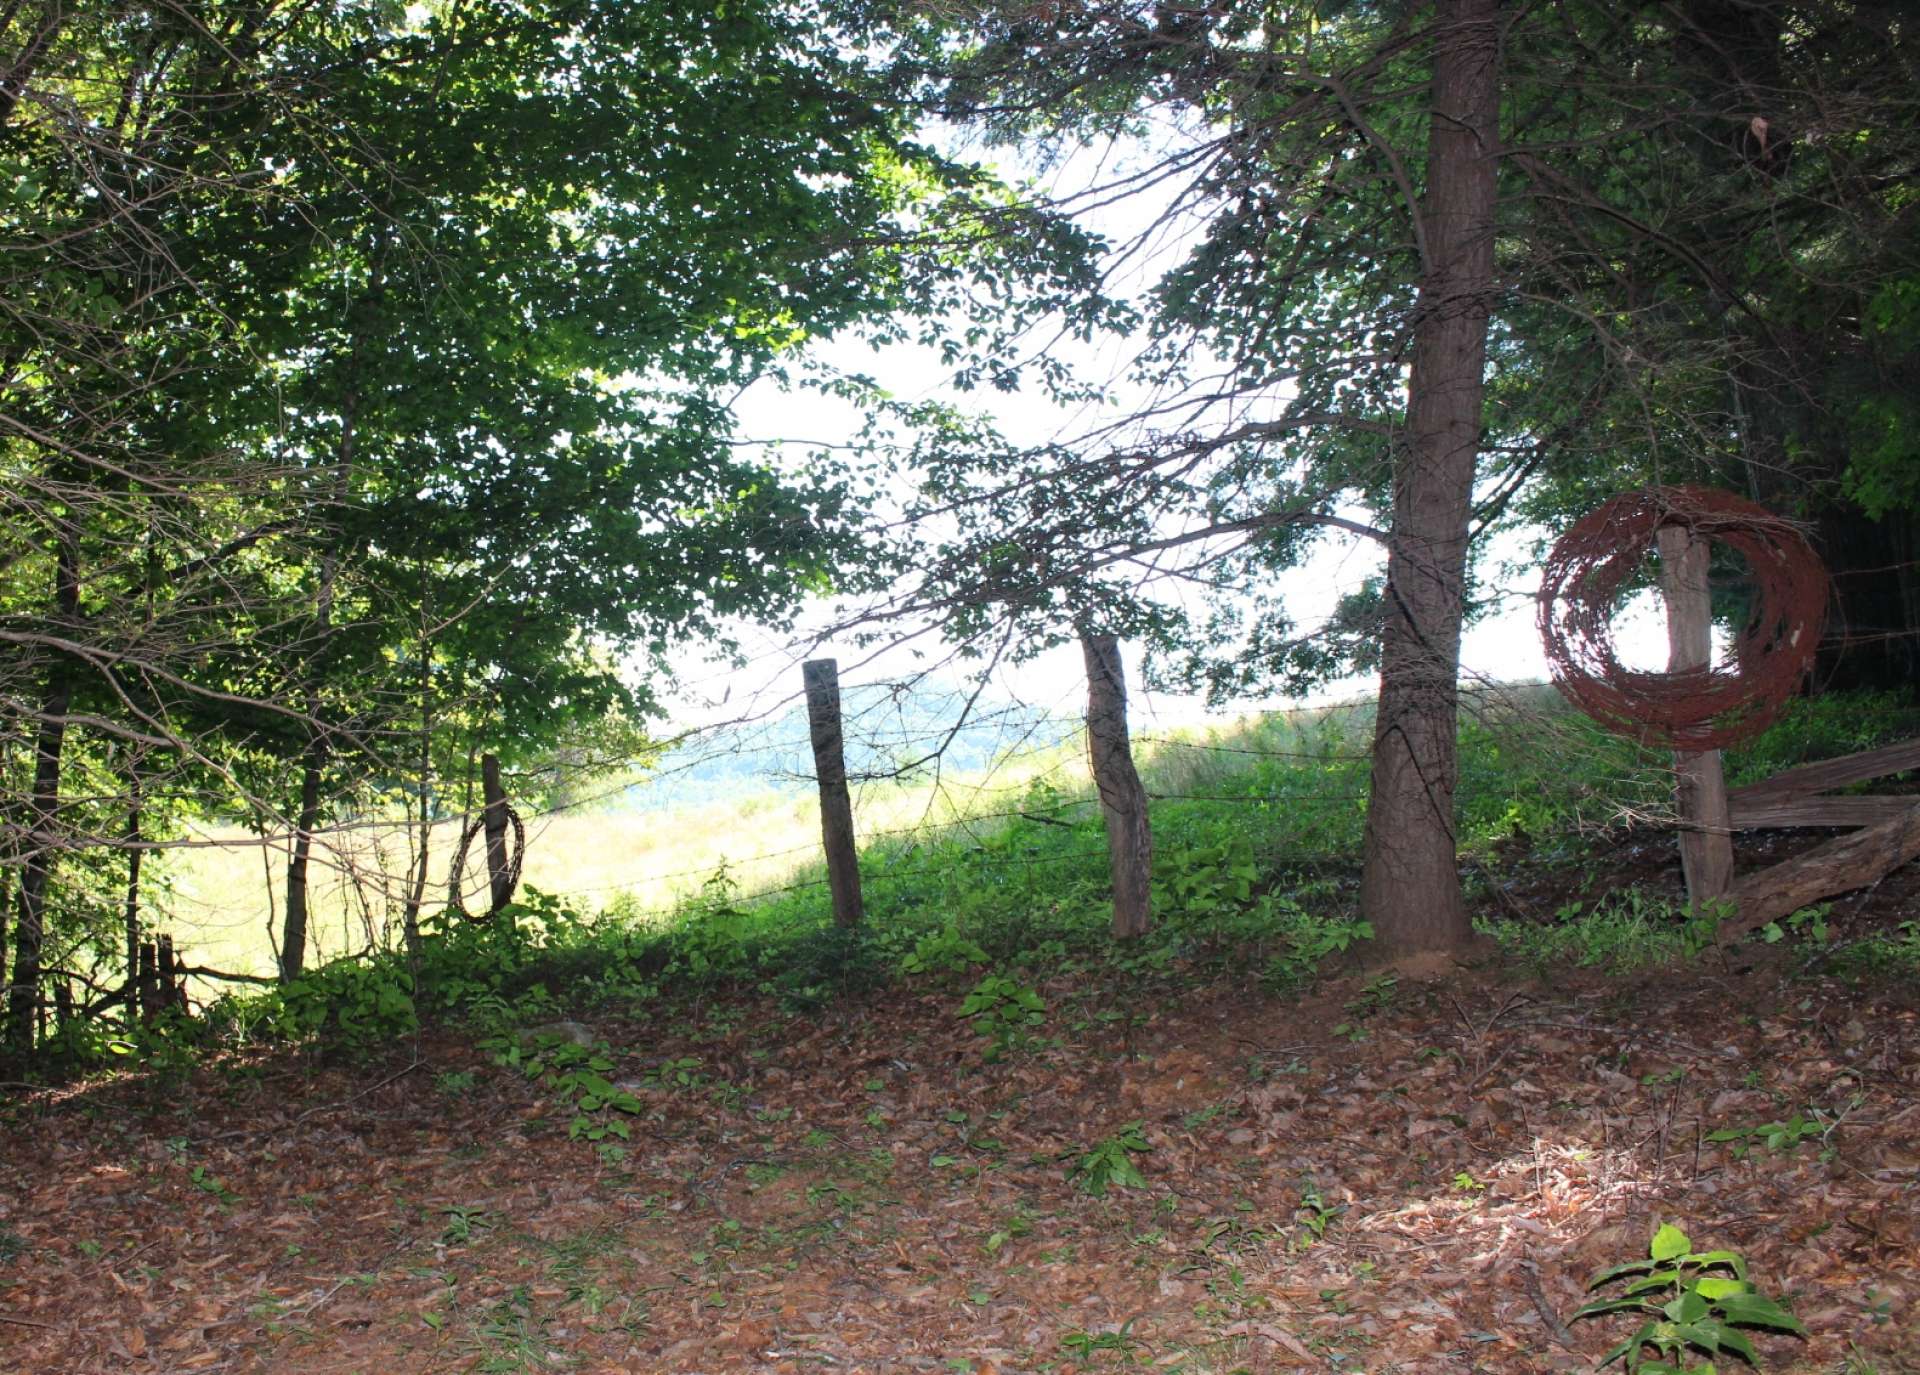 There is a potential for views of Three Top Mountain, with tree removal. A very small mountain stream meanders along the bottom of the boundary near the entrance.